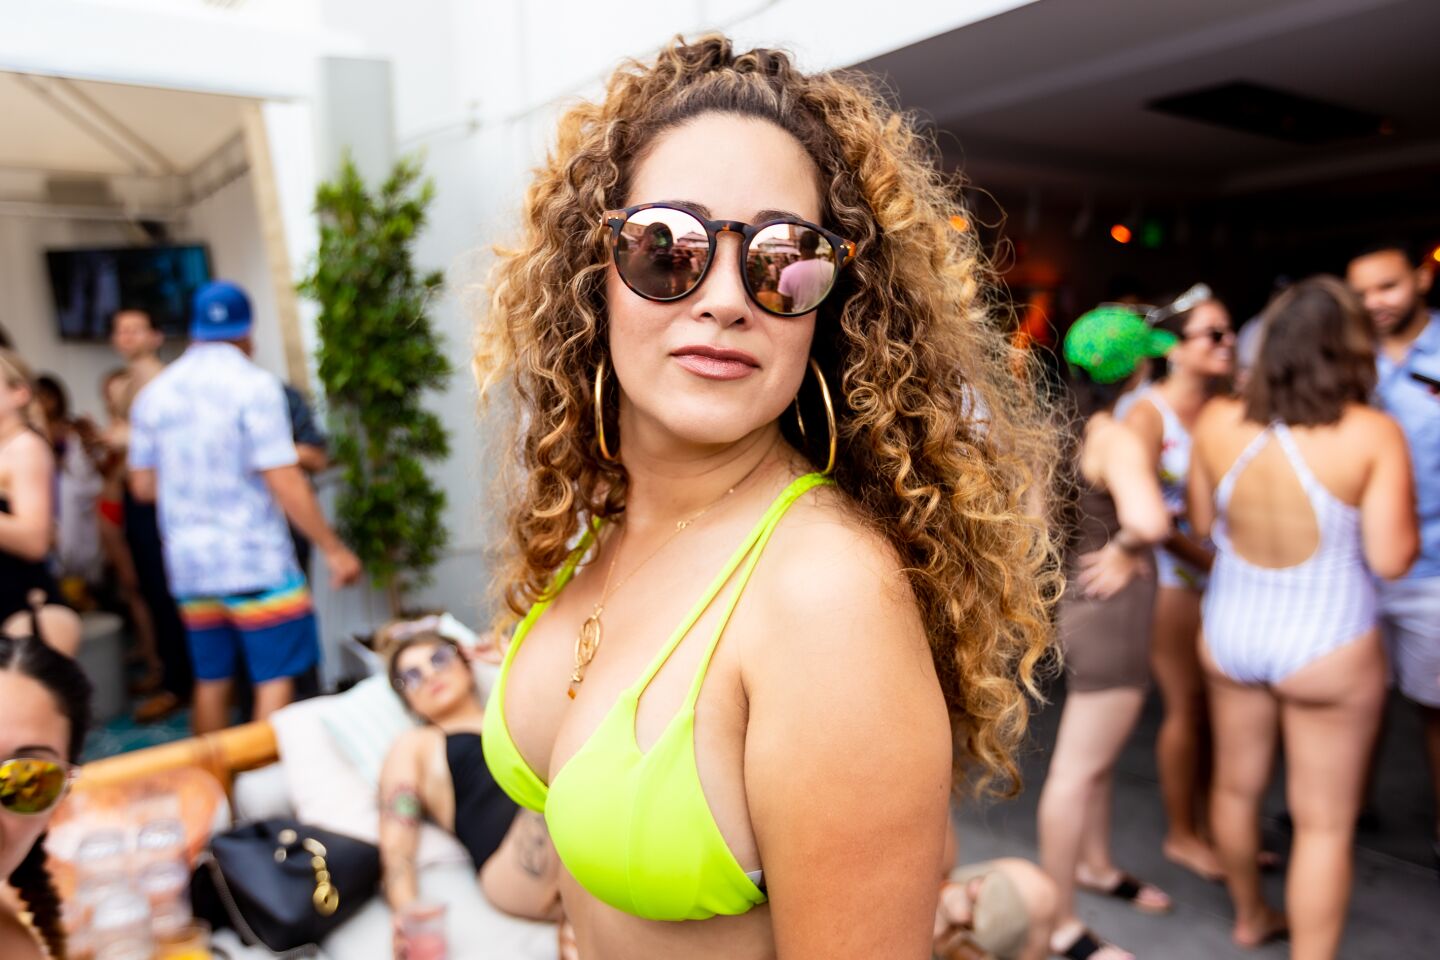 DJ Sam Blacky showed her hometown some love during a set at The Pool House on Sunday, Sept. 1, 2019.